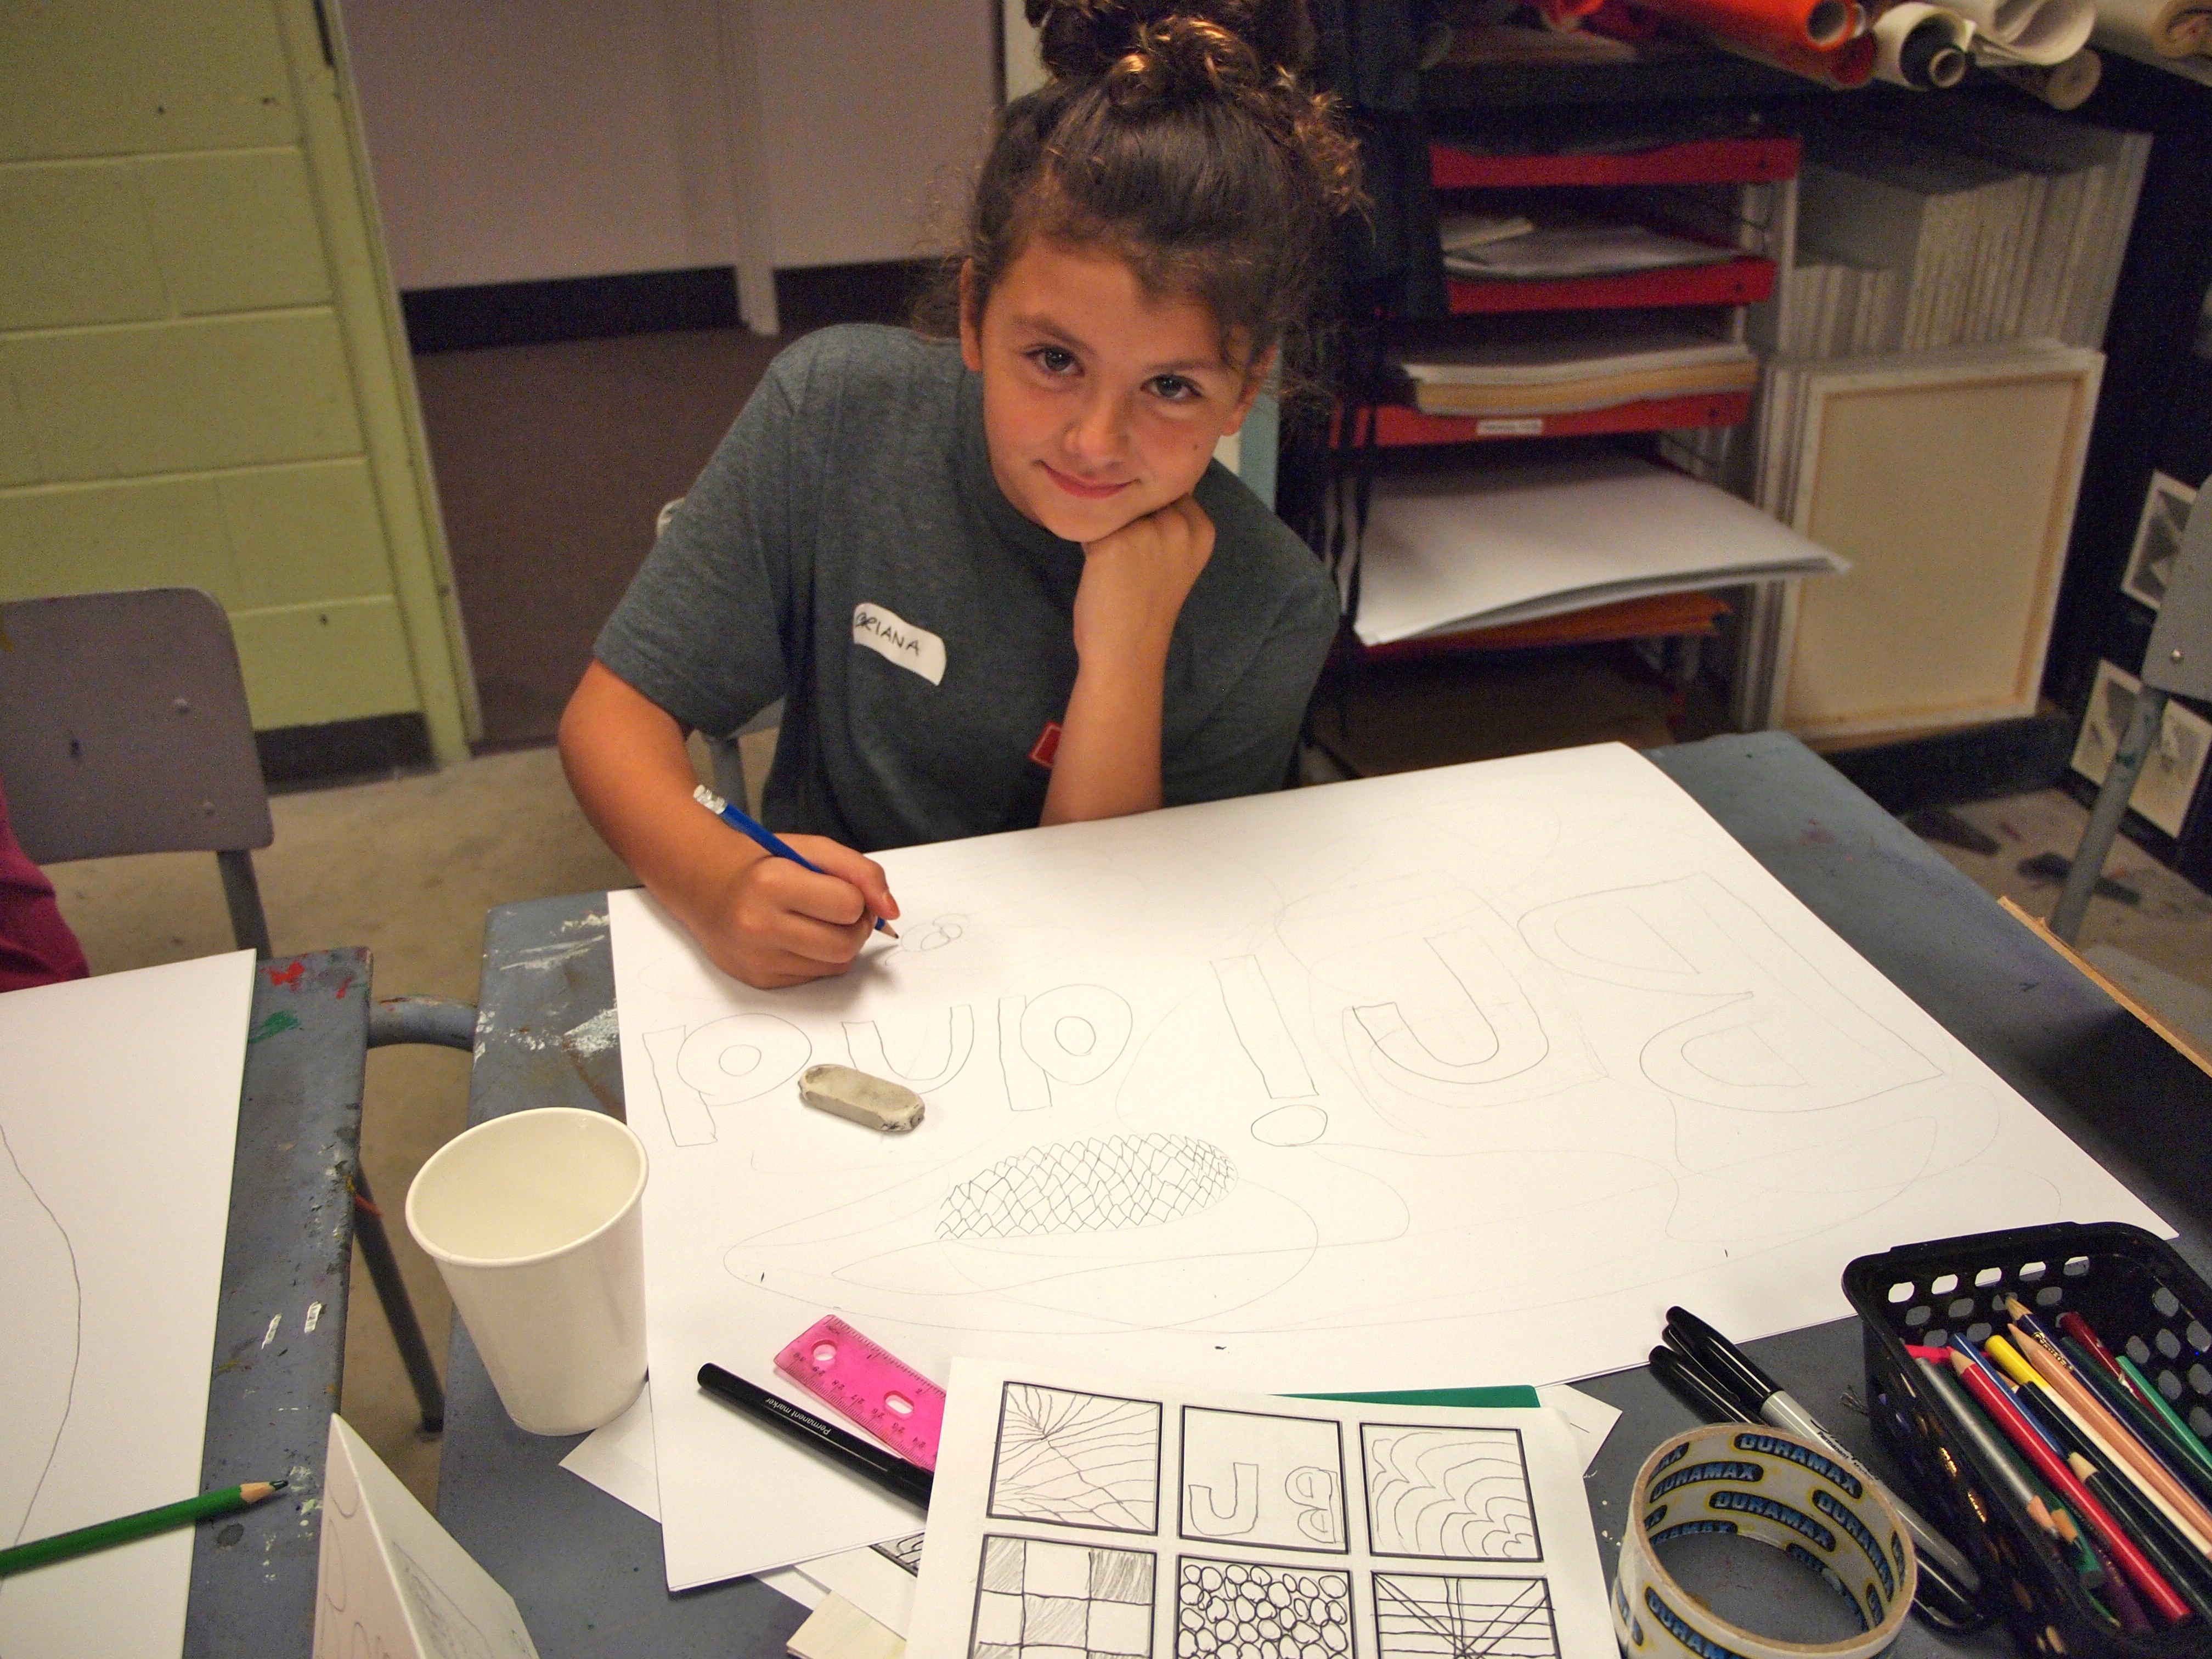 A young girl looks up at the camera as she works on a preliminary drawing on a large sheet of white paper with storyboards laid out in the foreground as reference